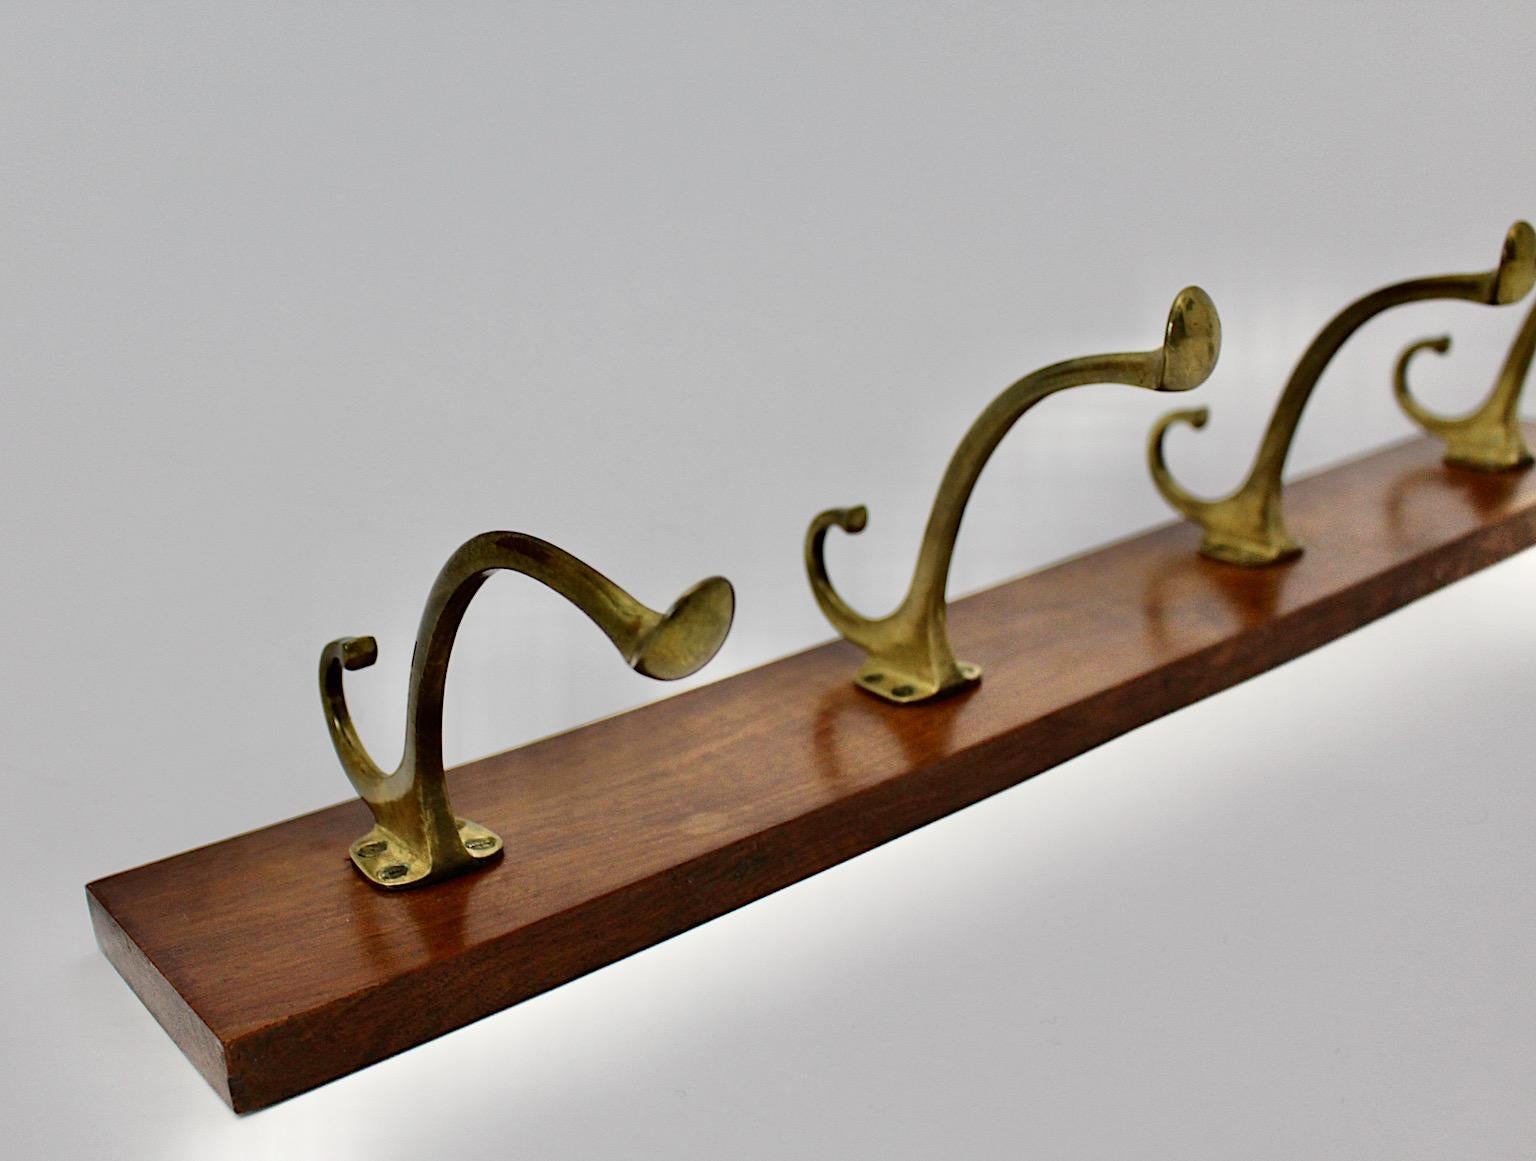 Art Deco vintage coat rack from brass and walnut Style Adolf Loos 1930s Austria.
A wonderful classy coat rack with four brass coat hooks on a walnut board.
The rack is easy to fix with two screws.
While the walnut rack features a warm brown color